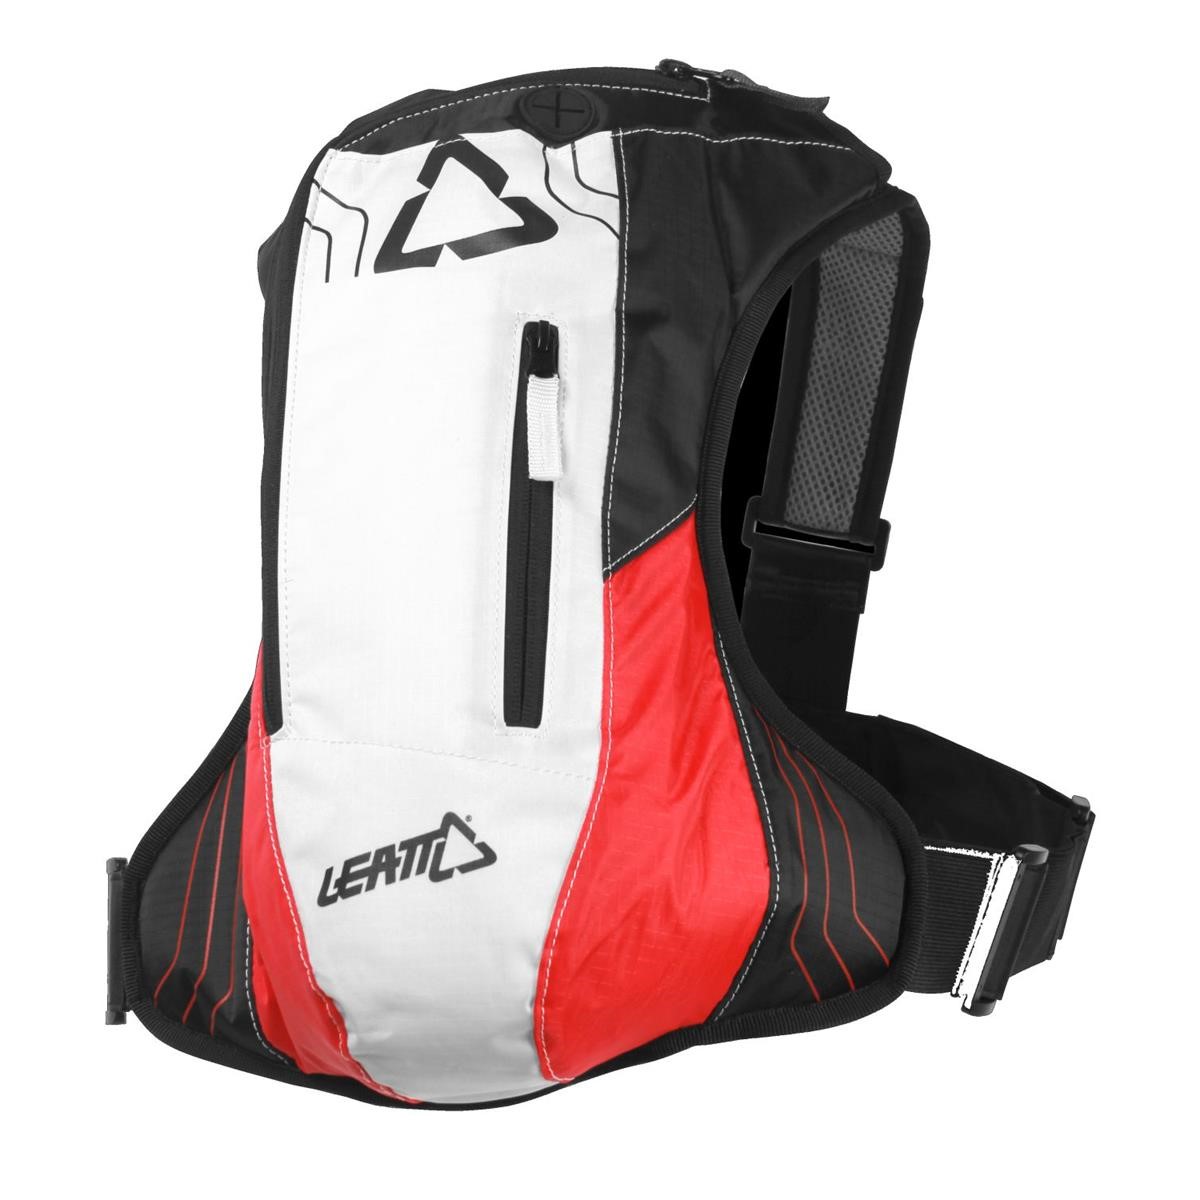 Leatt Hydration Pack H2 Hydration Black/Red/White, 2.5 L